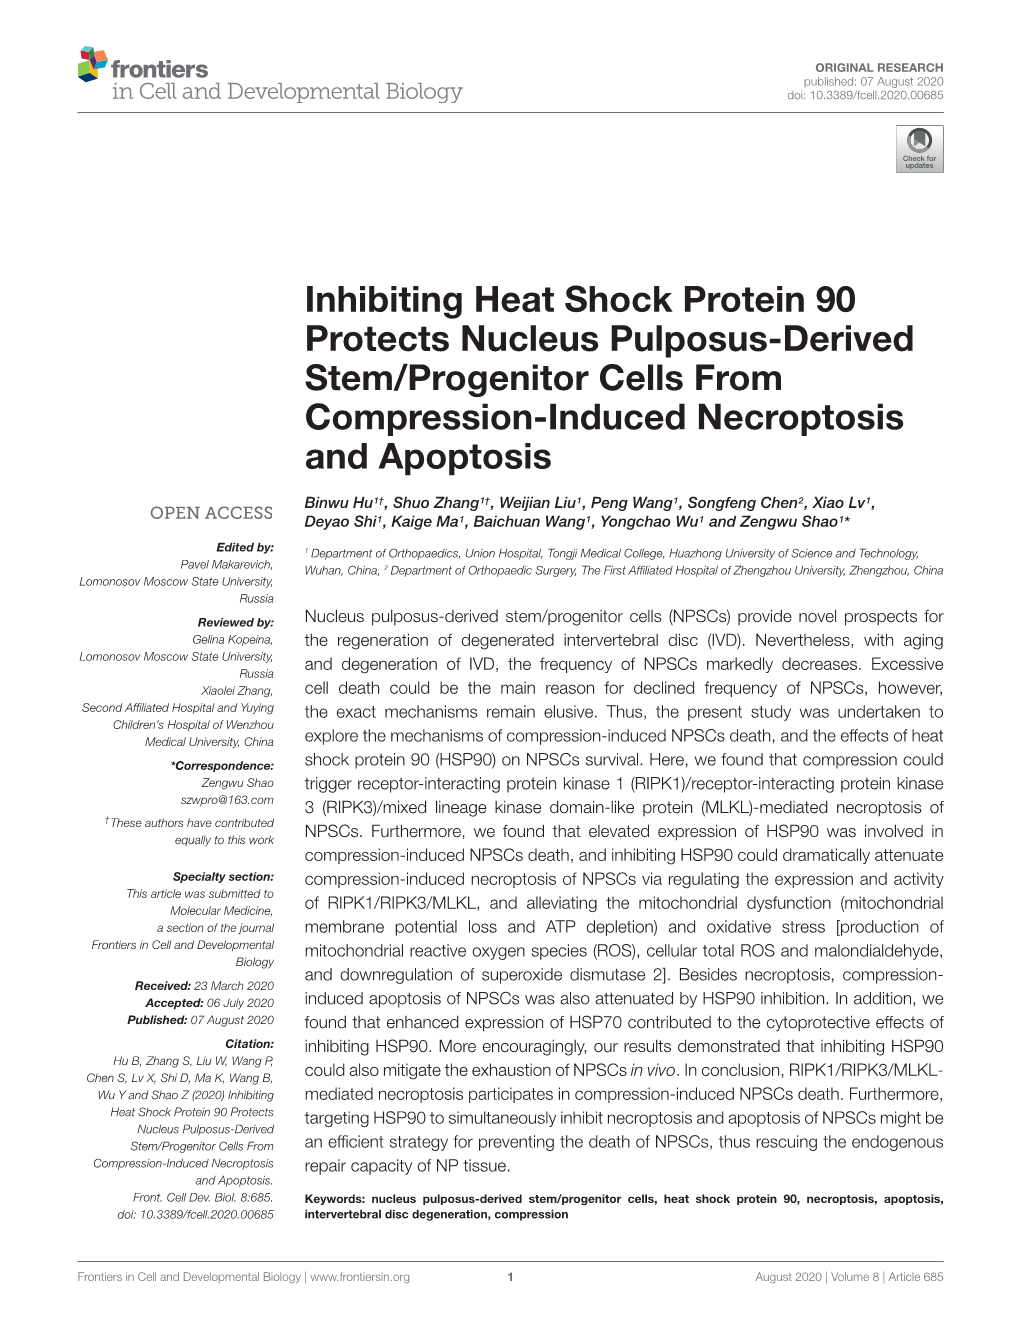 Inhibiting Heat Shock Protein 90 Protects Nucleus Pulposus-Derived Stem/Progenitor Cells from Compression-Induced Necroptosis and Apoptosis